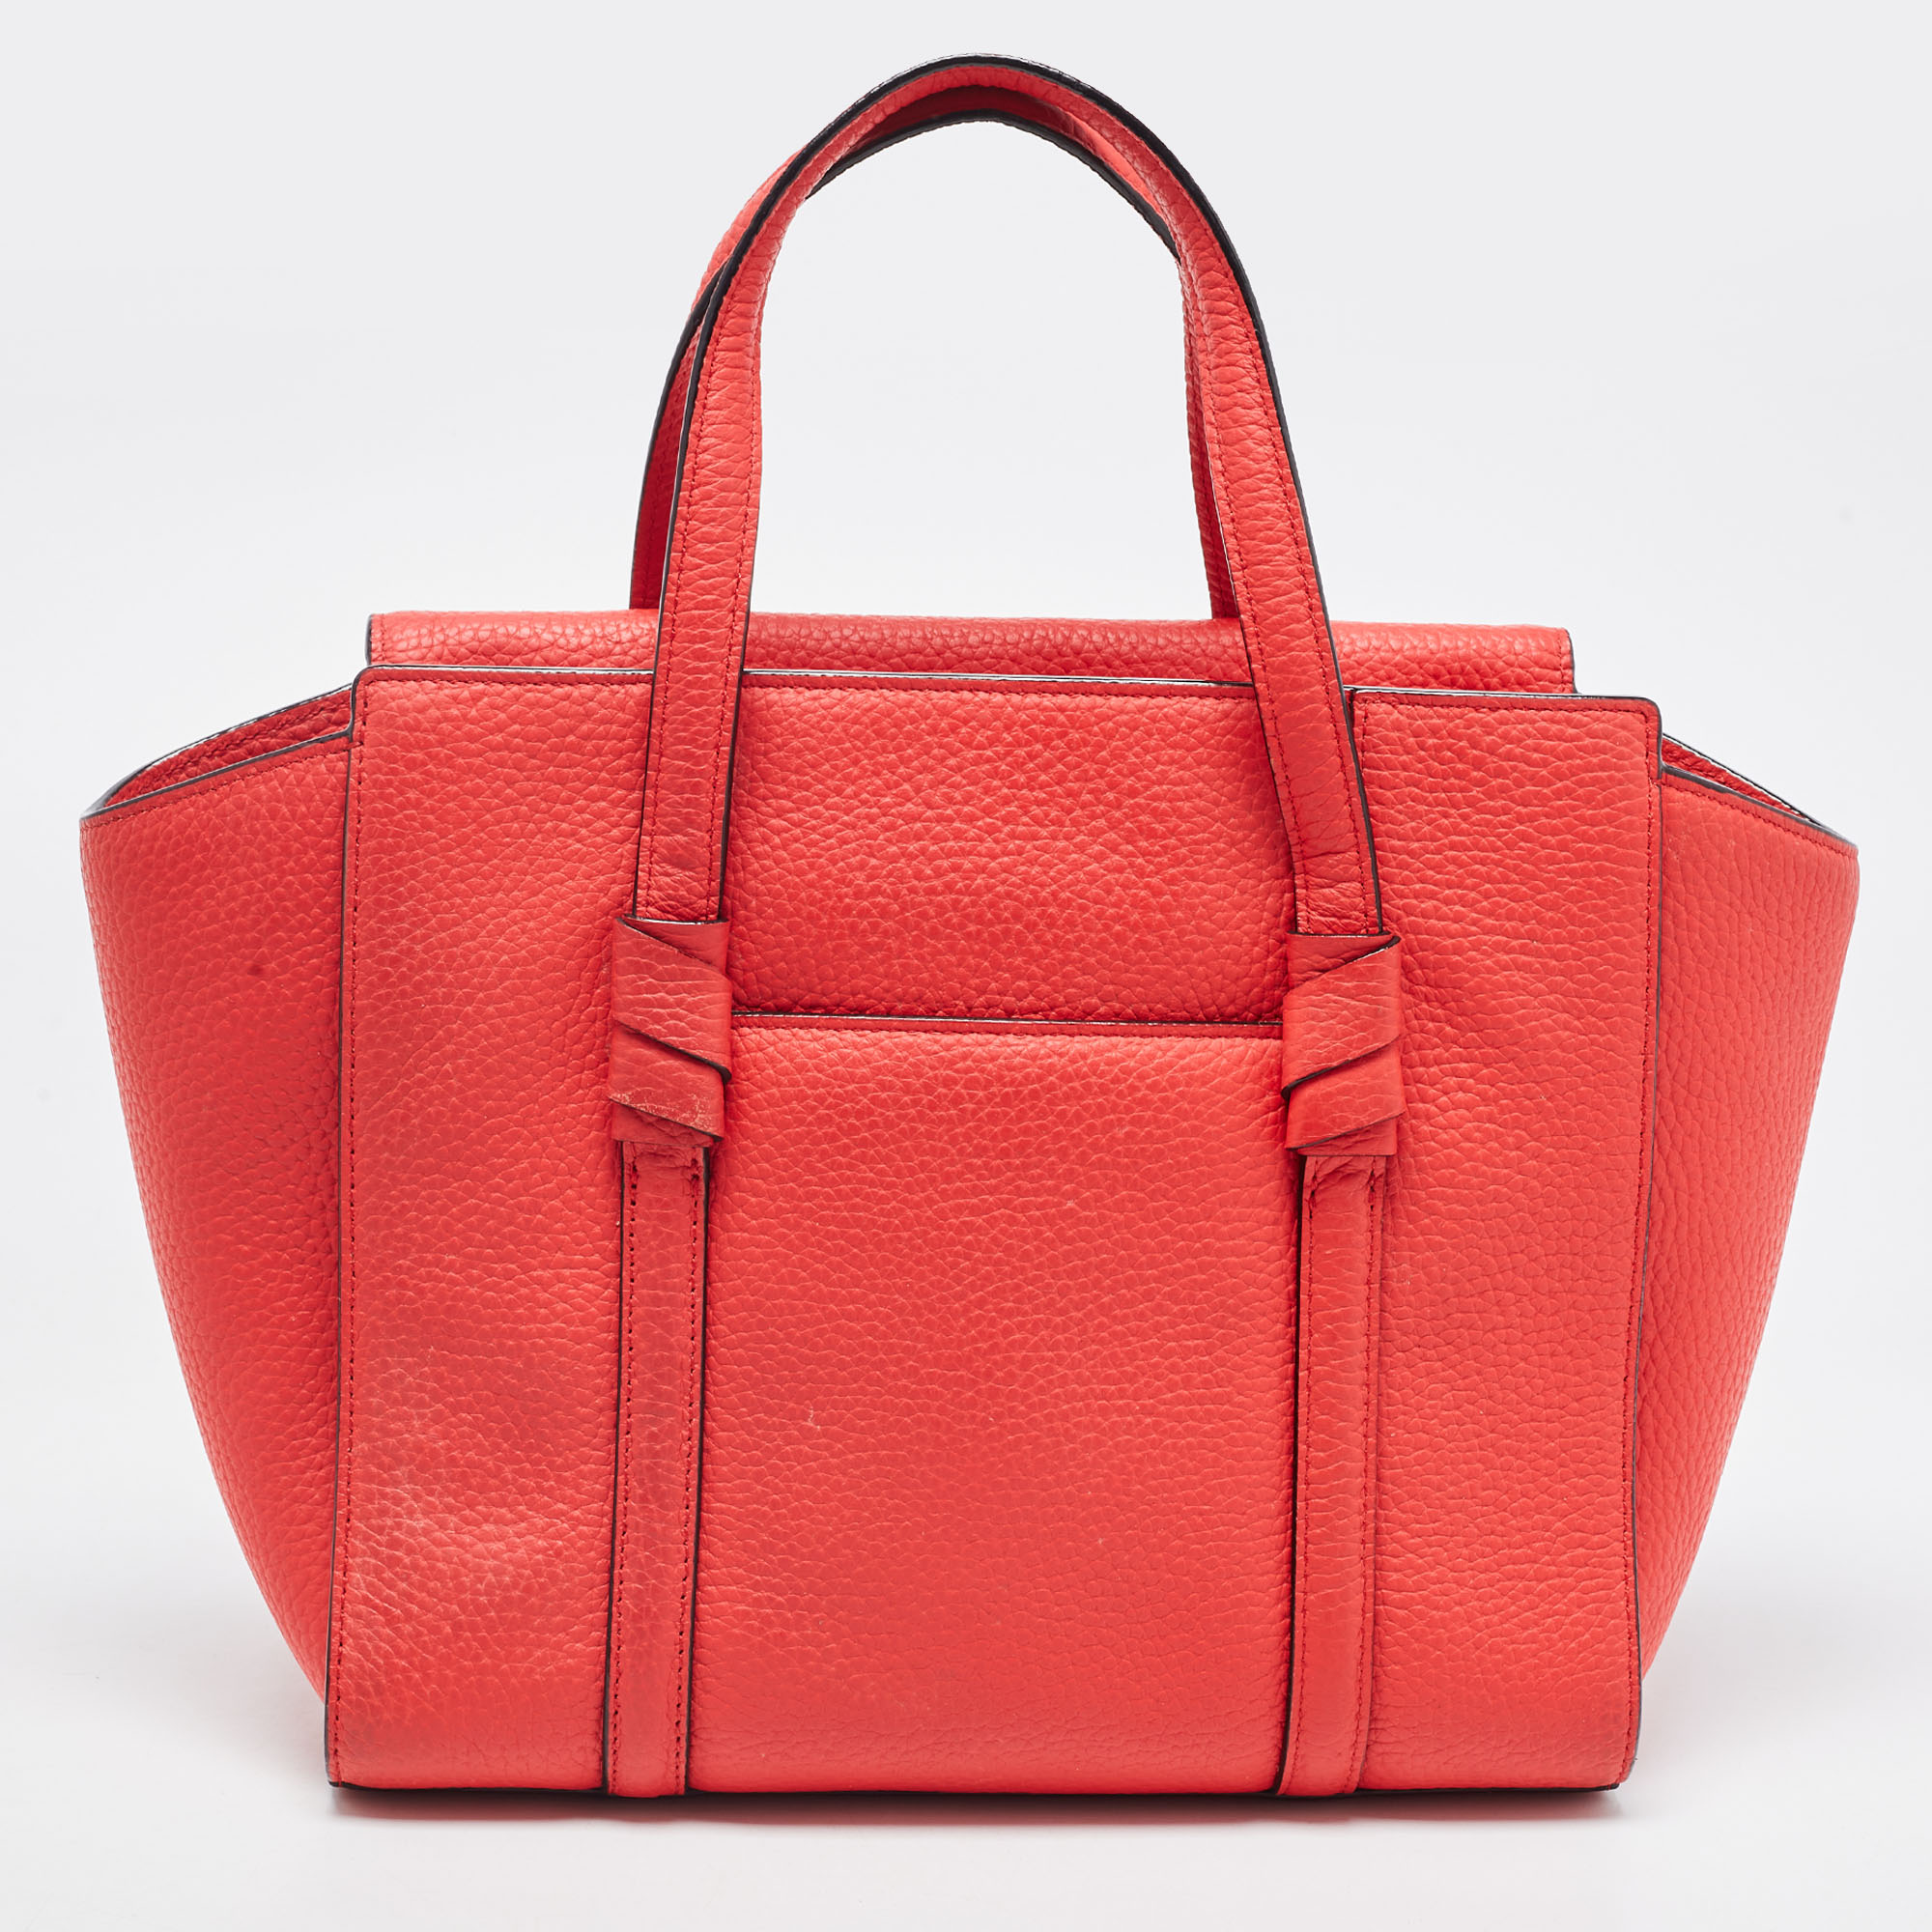 Kate Spade Red Leather Abigail Tote